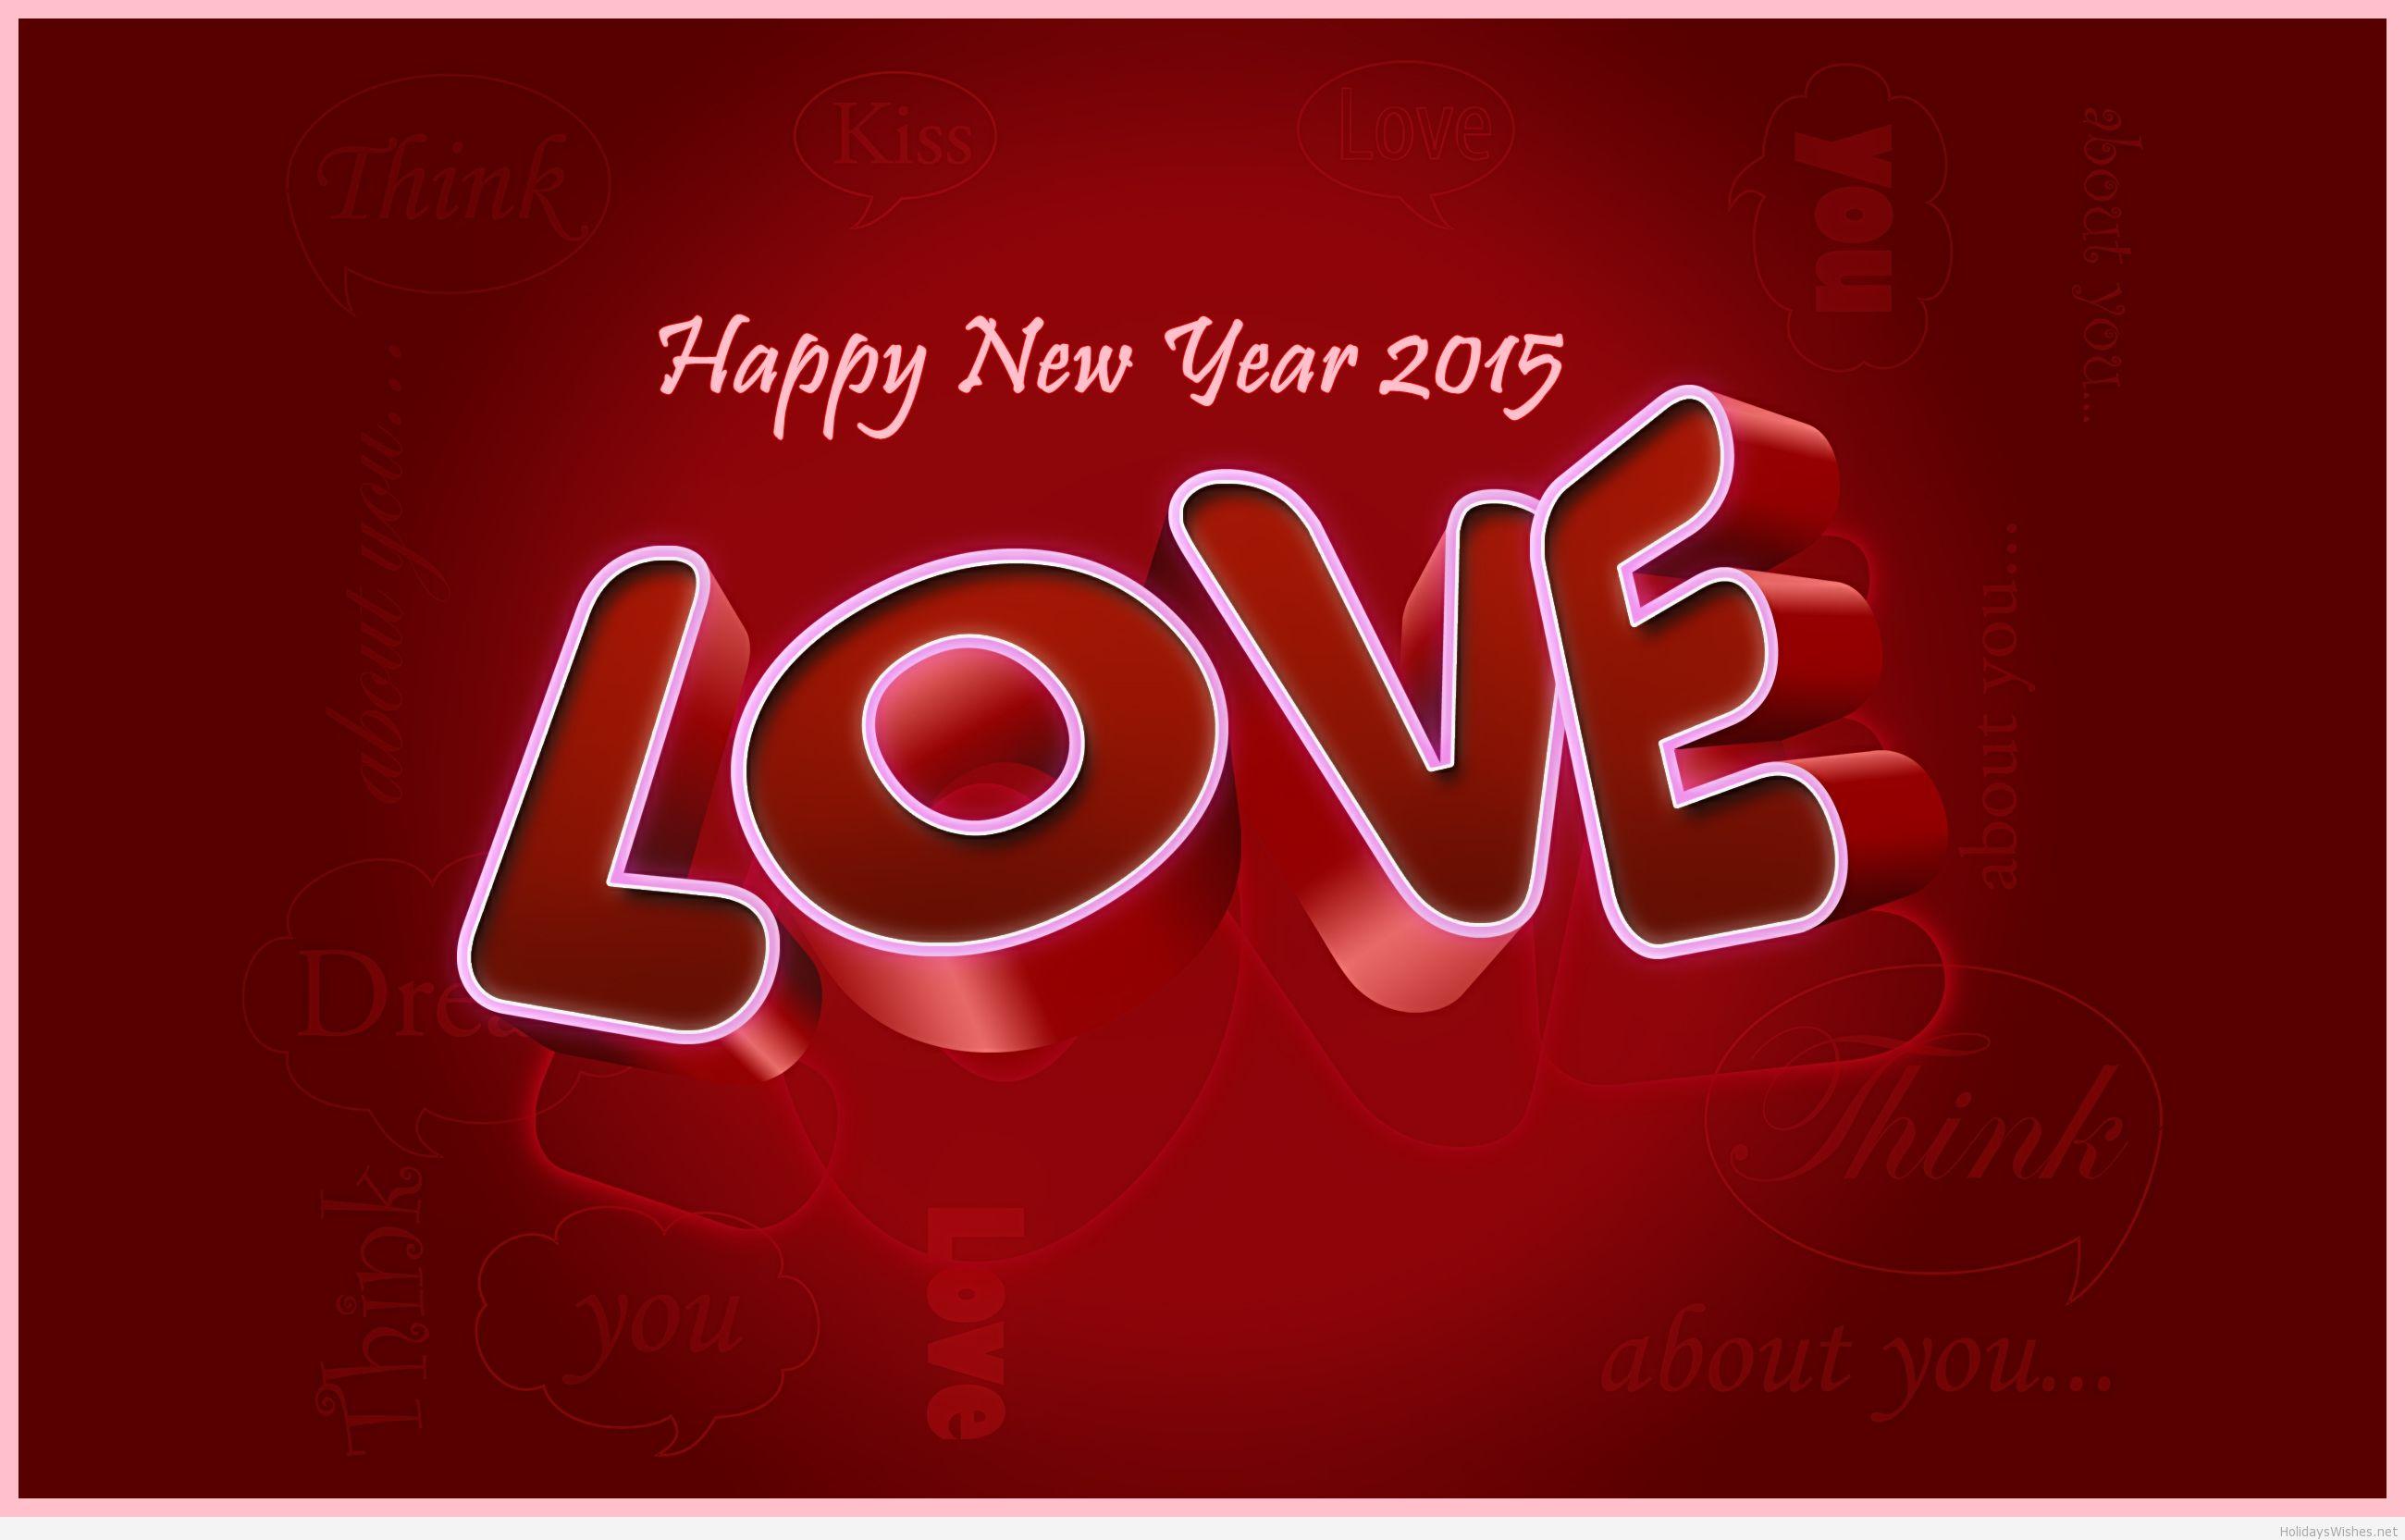 Love Messages For New Year 2015. Happy New Year 2015 Wallpaper